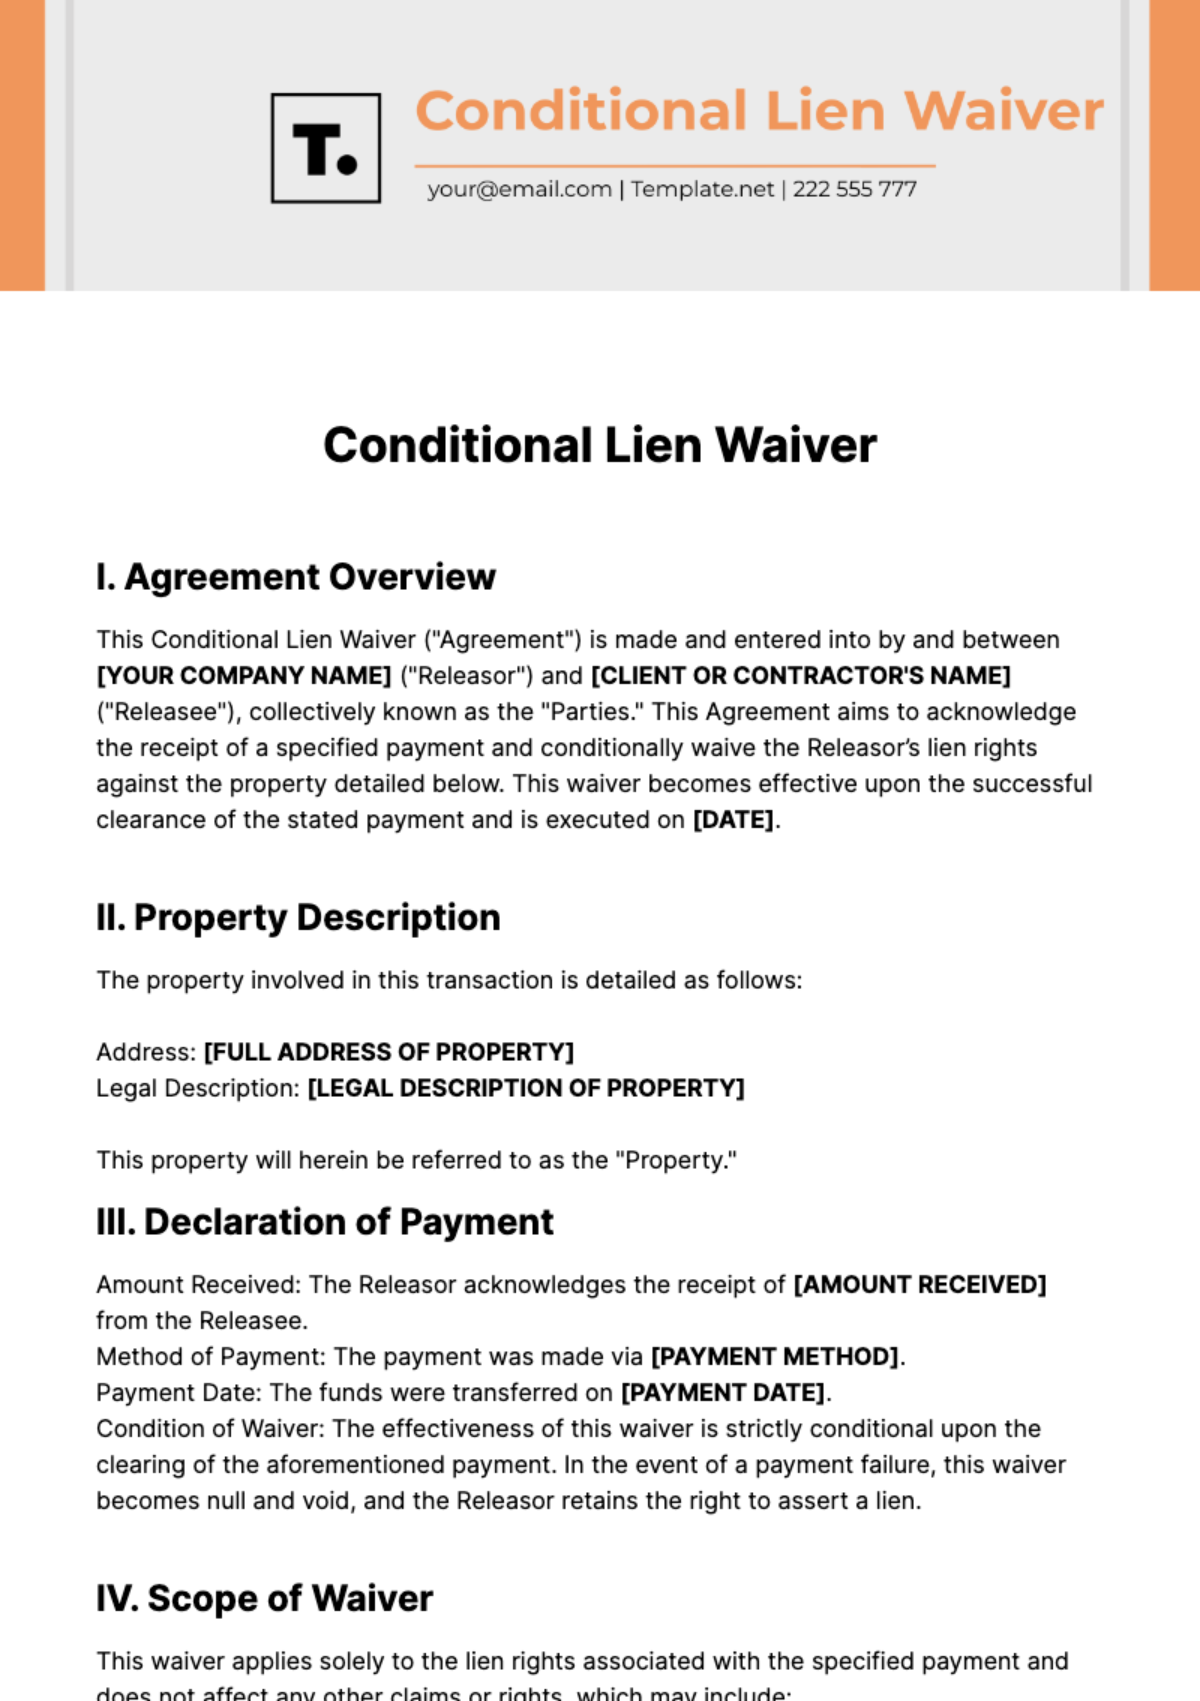 Free Conditional Lien Waiver Template